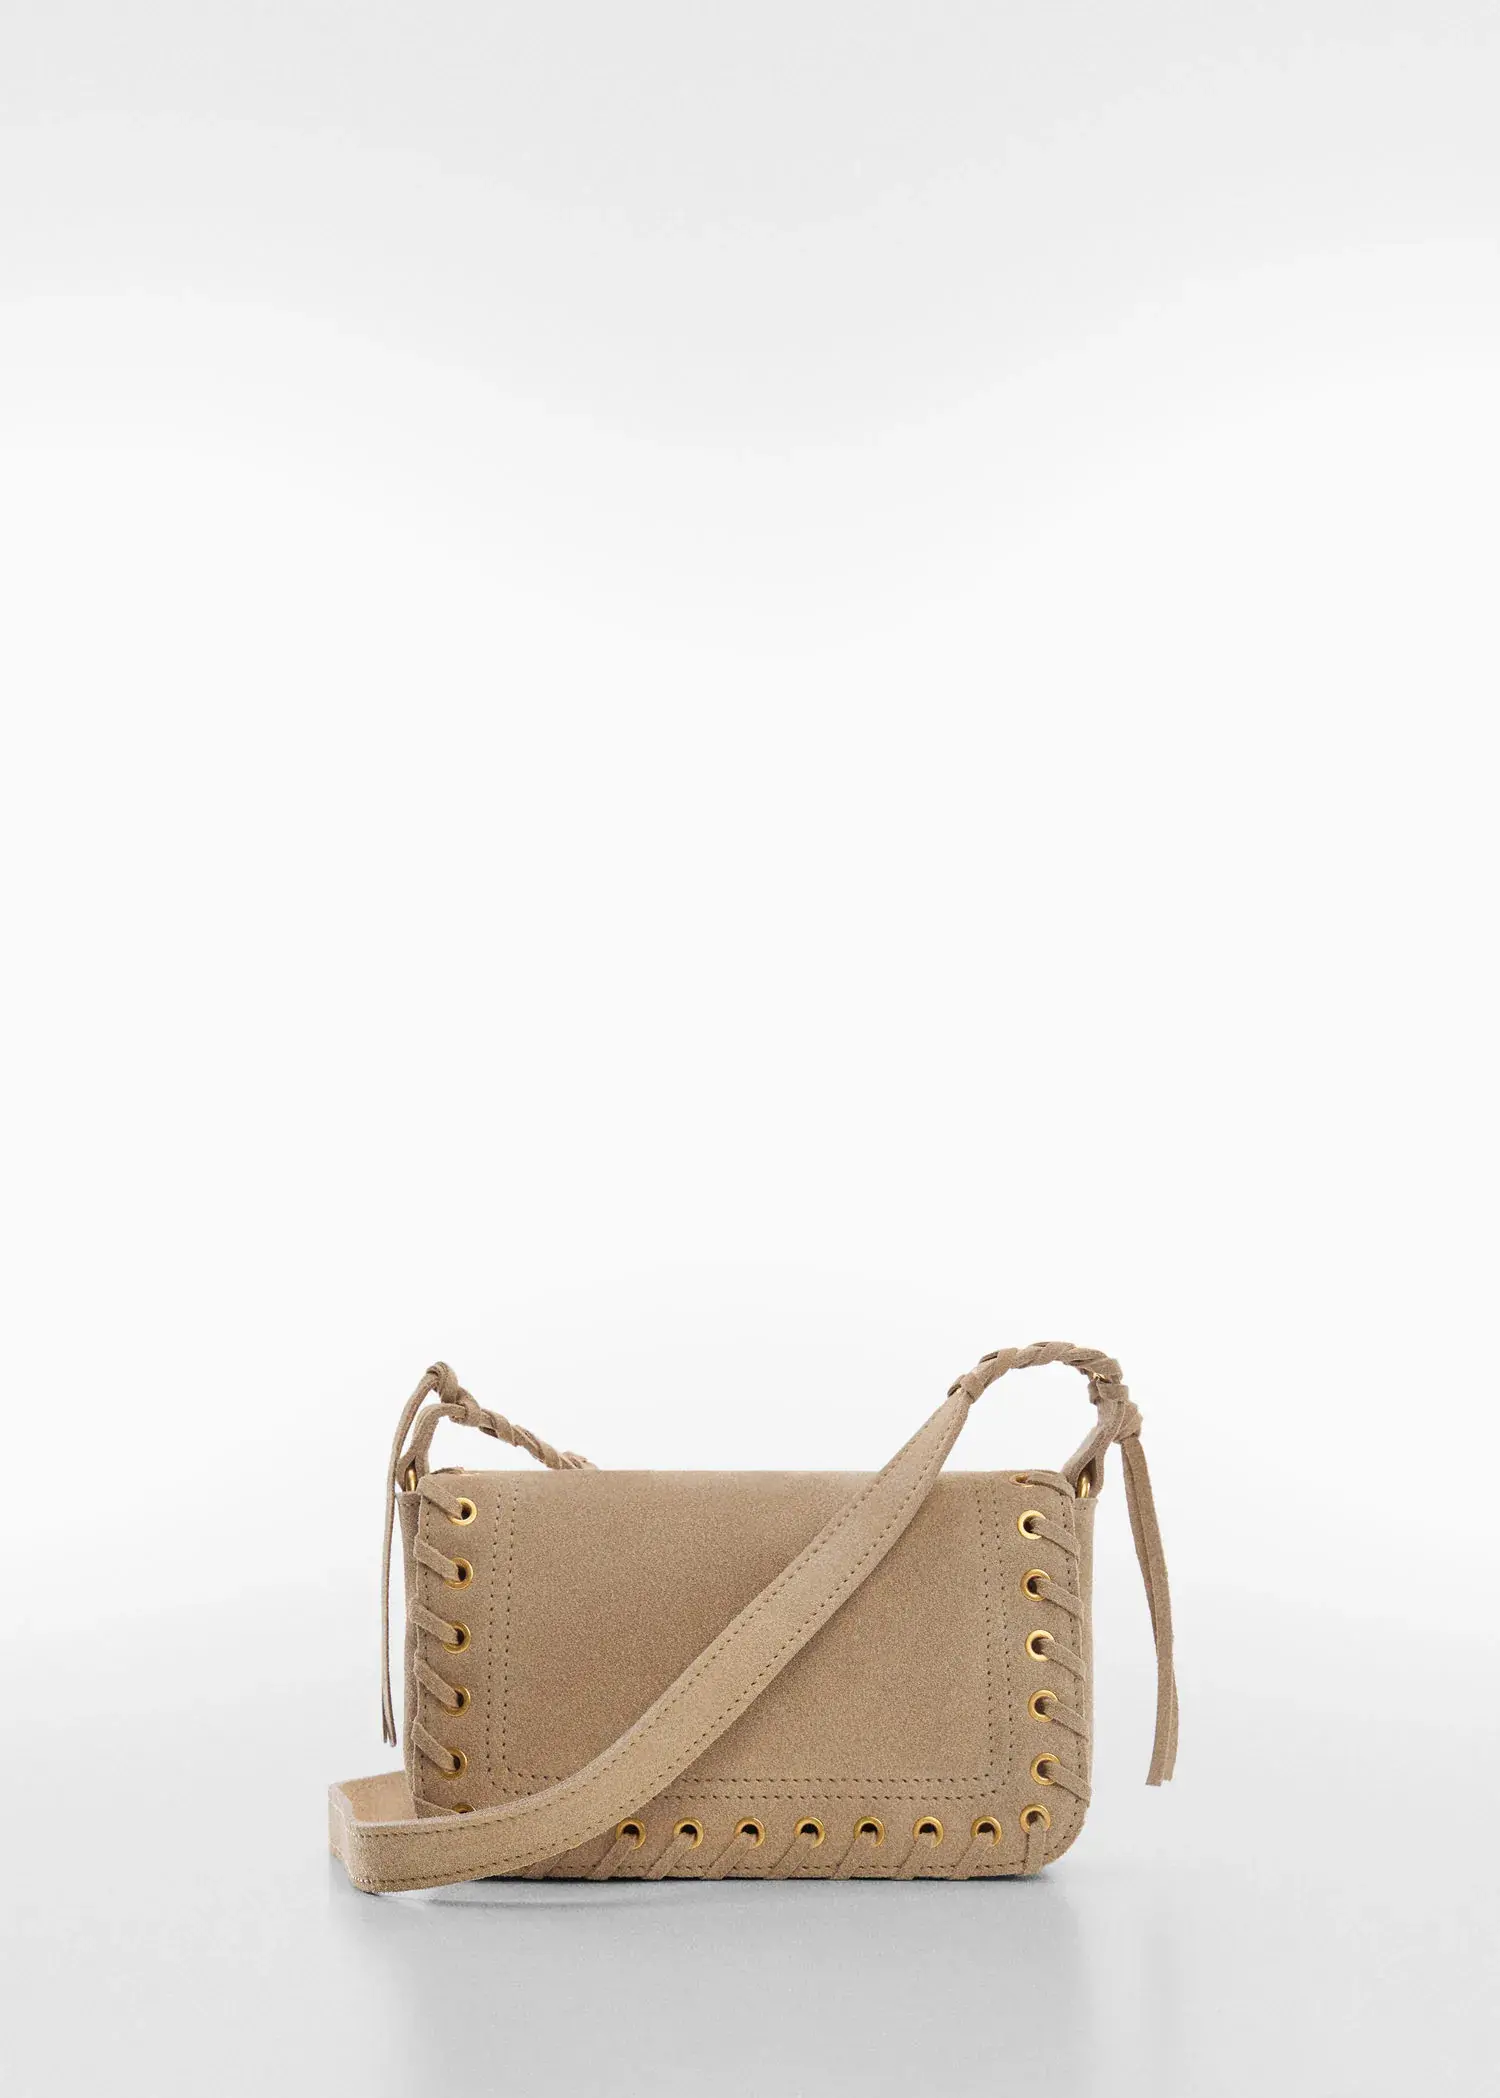 Mango Stud leather bag. a beige purse is shown on a white background. 